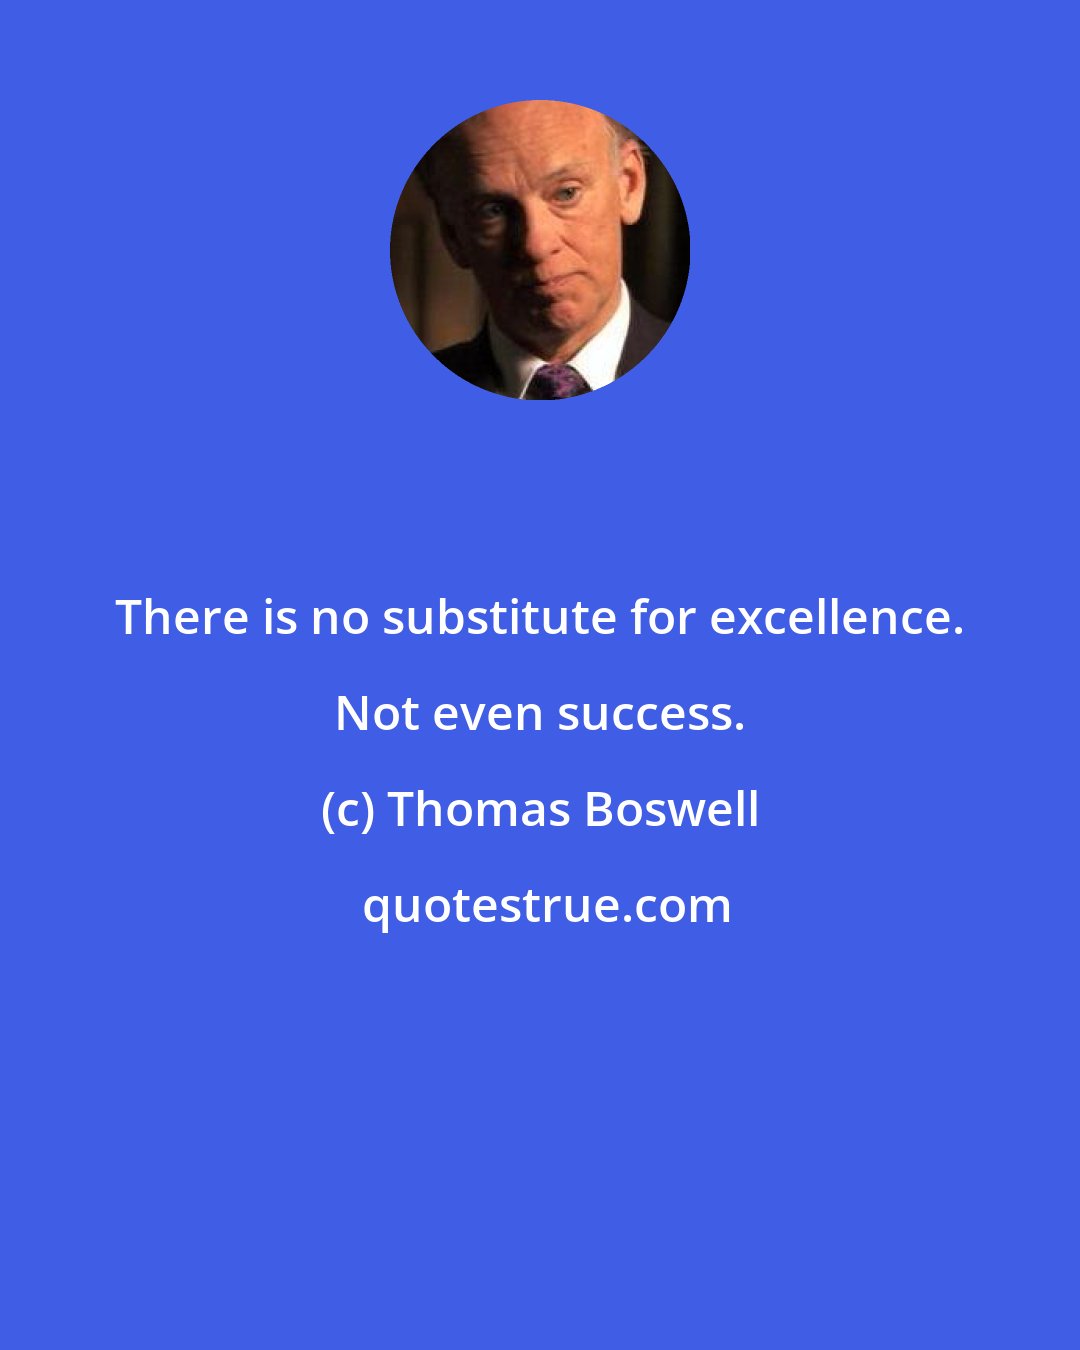 Thomas Boswell: There is no substitute for excellence. Not even success.